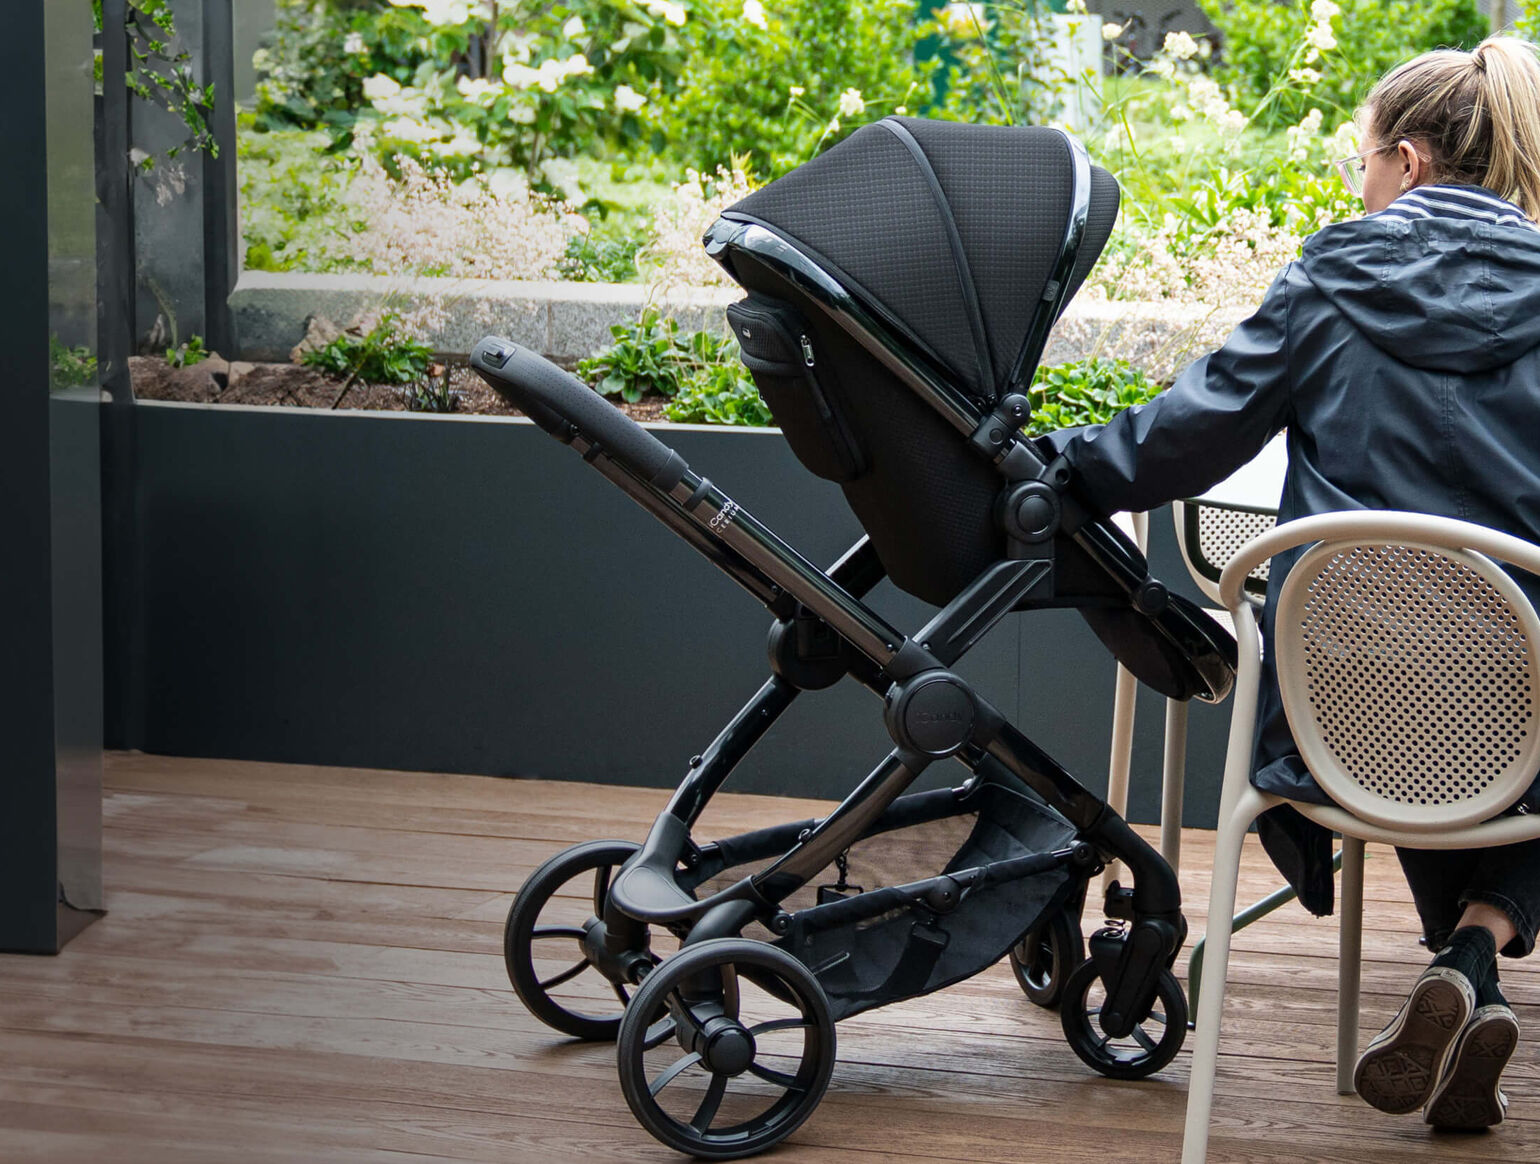 iCandy-Buying-a-pushchair- What-you-need-to-know